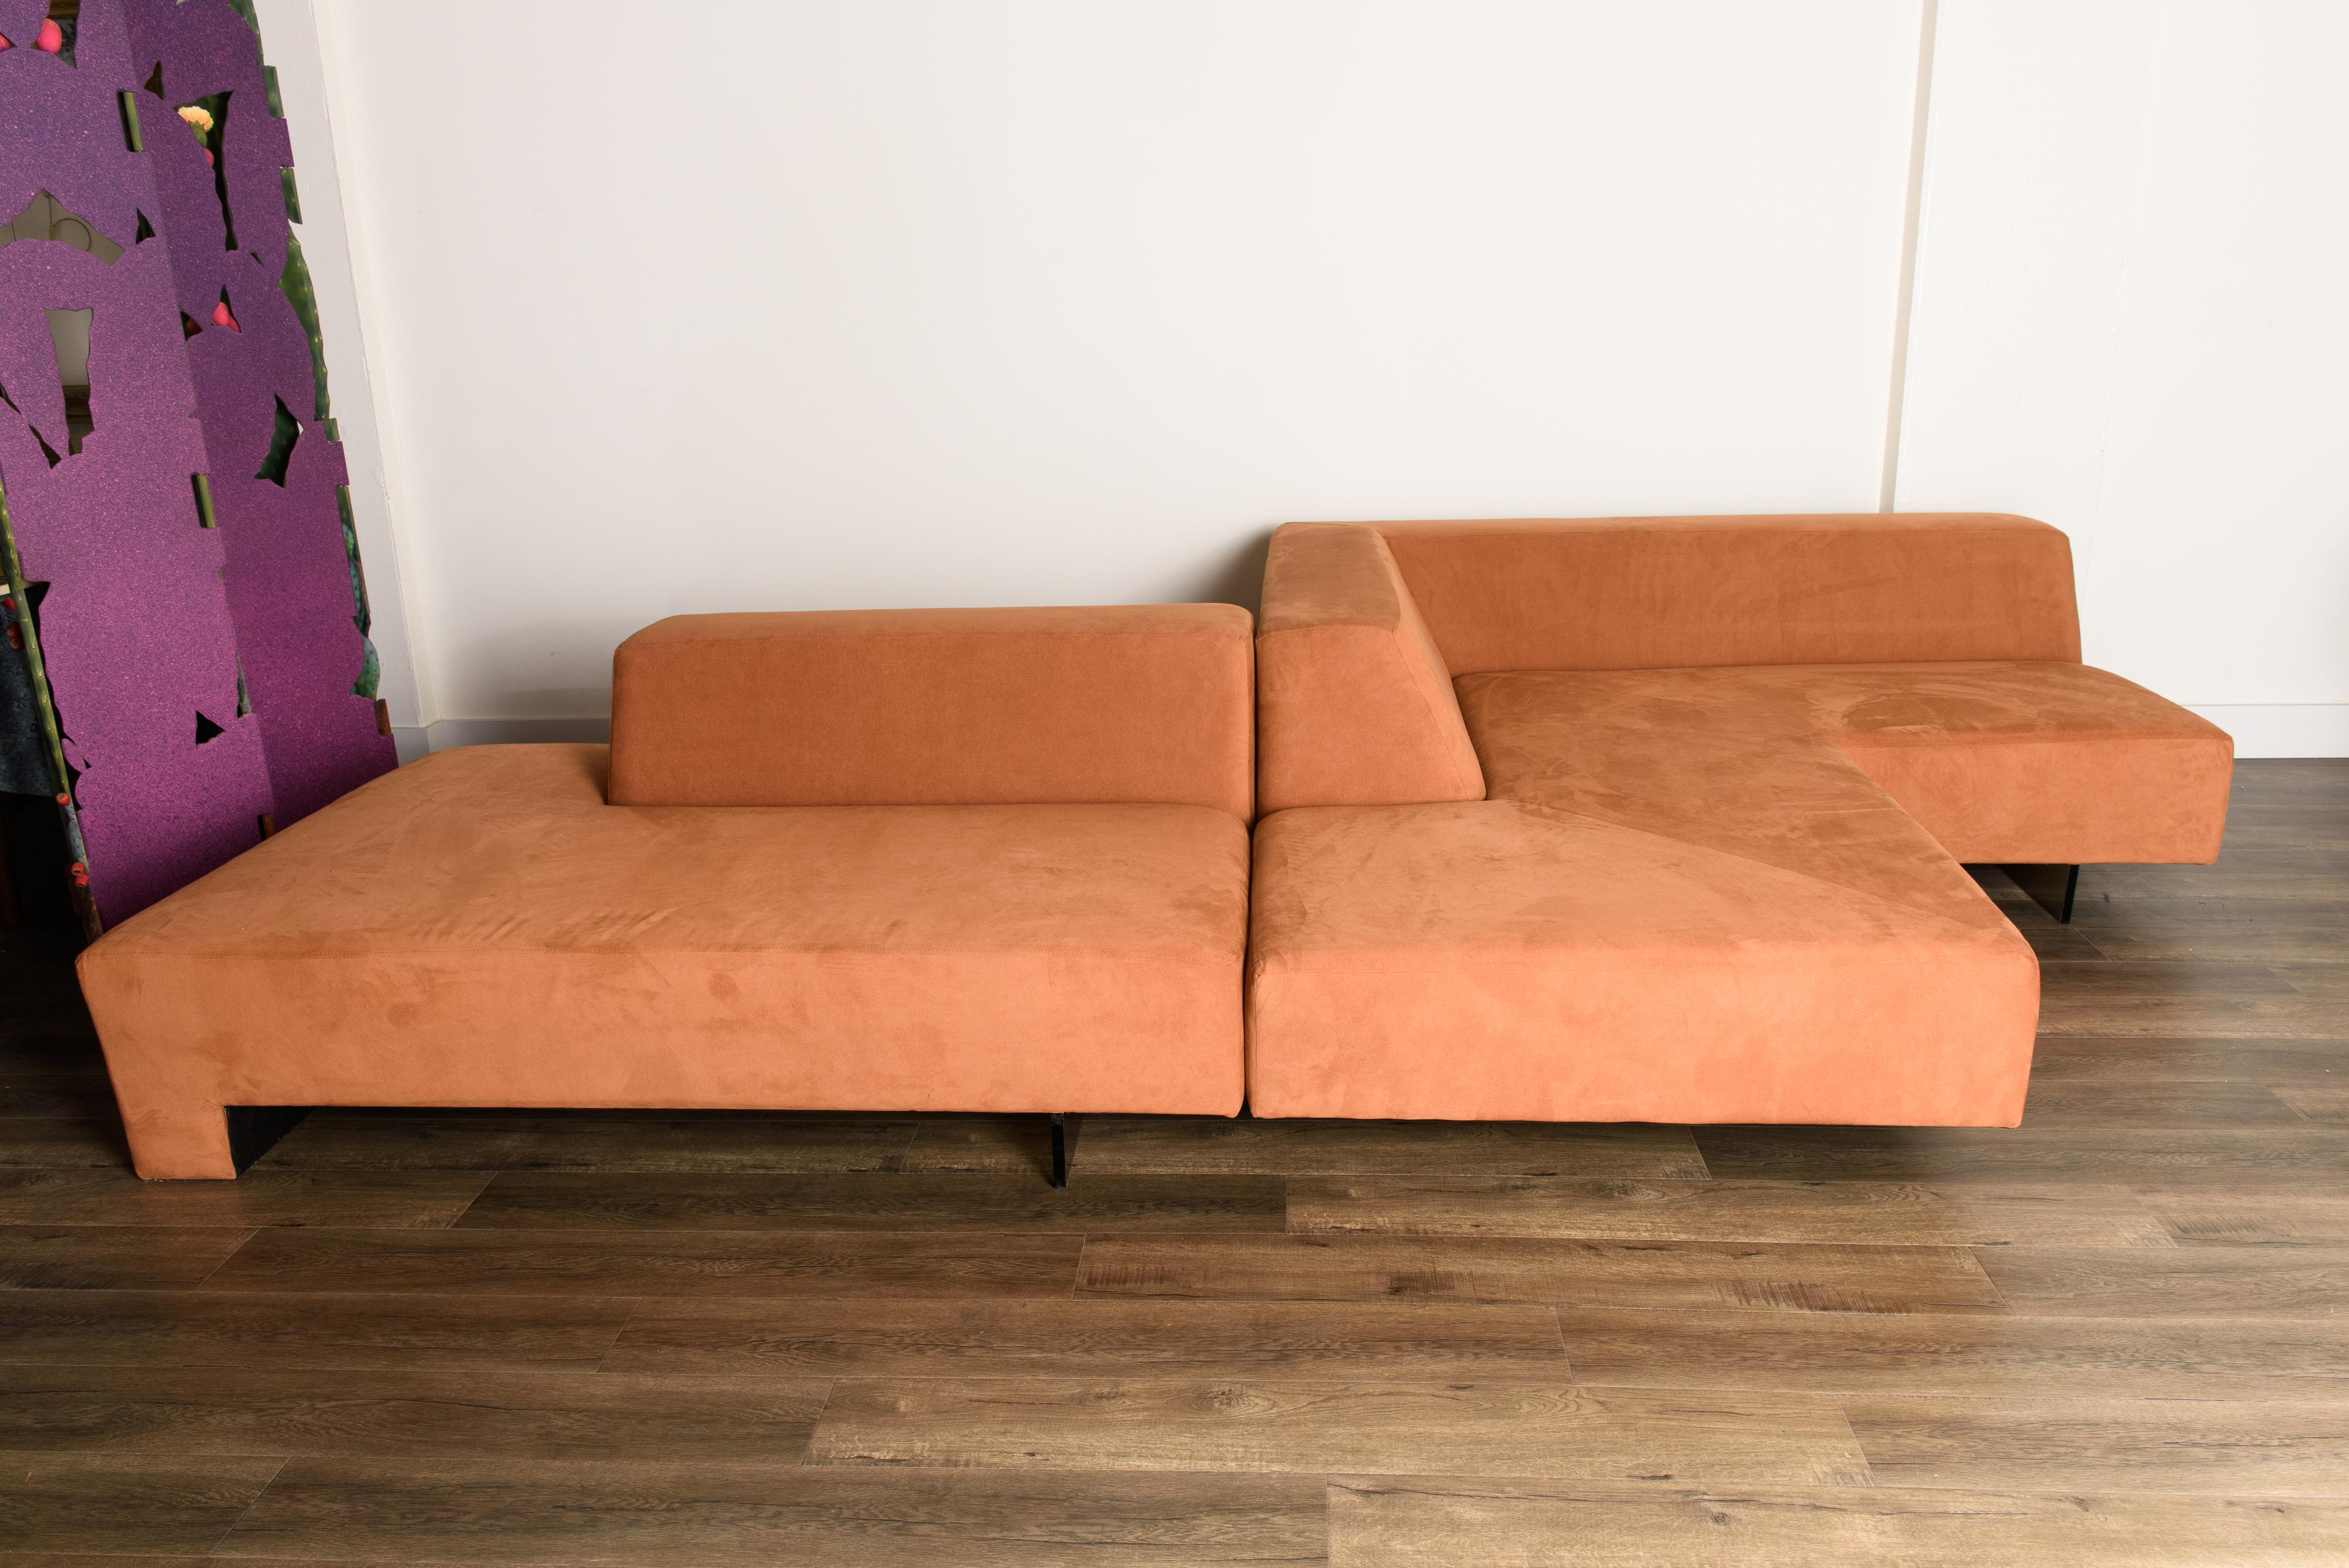 This incredible large sectional sofa is by Vladimir Kagan, called the 'Omnibus' seating system. Designed in the 1960s, the Omnibus has remained as one of the most prolific and unique sectional sofa designs spanning all decades since, celebrated by